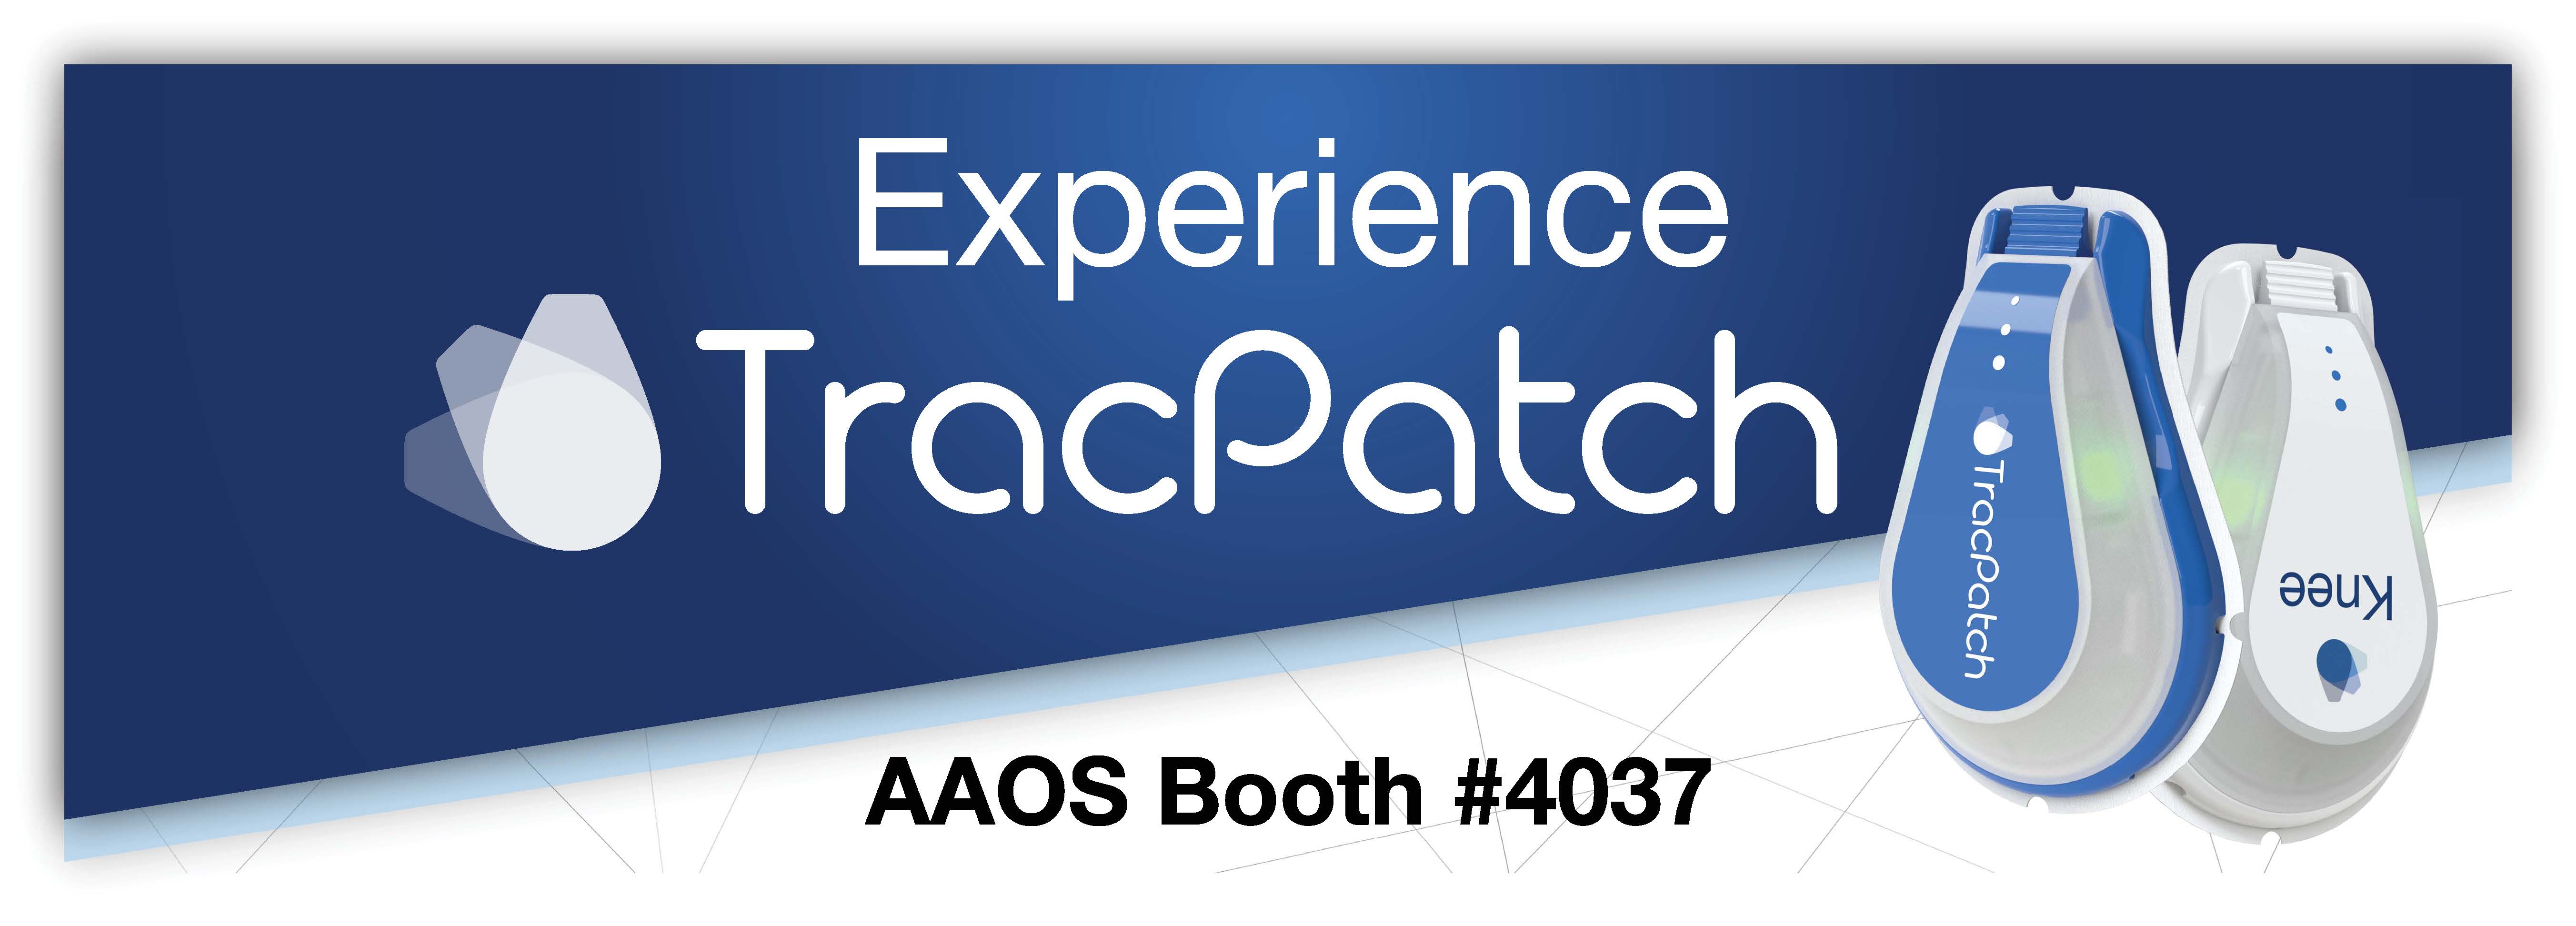 Experience TracPatch at the 2018 AAOS Annual Meeting, Booth 4037